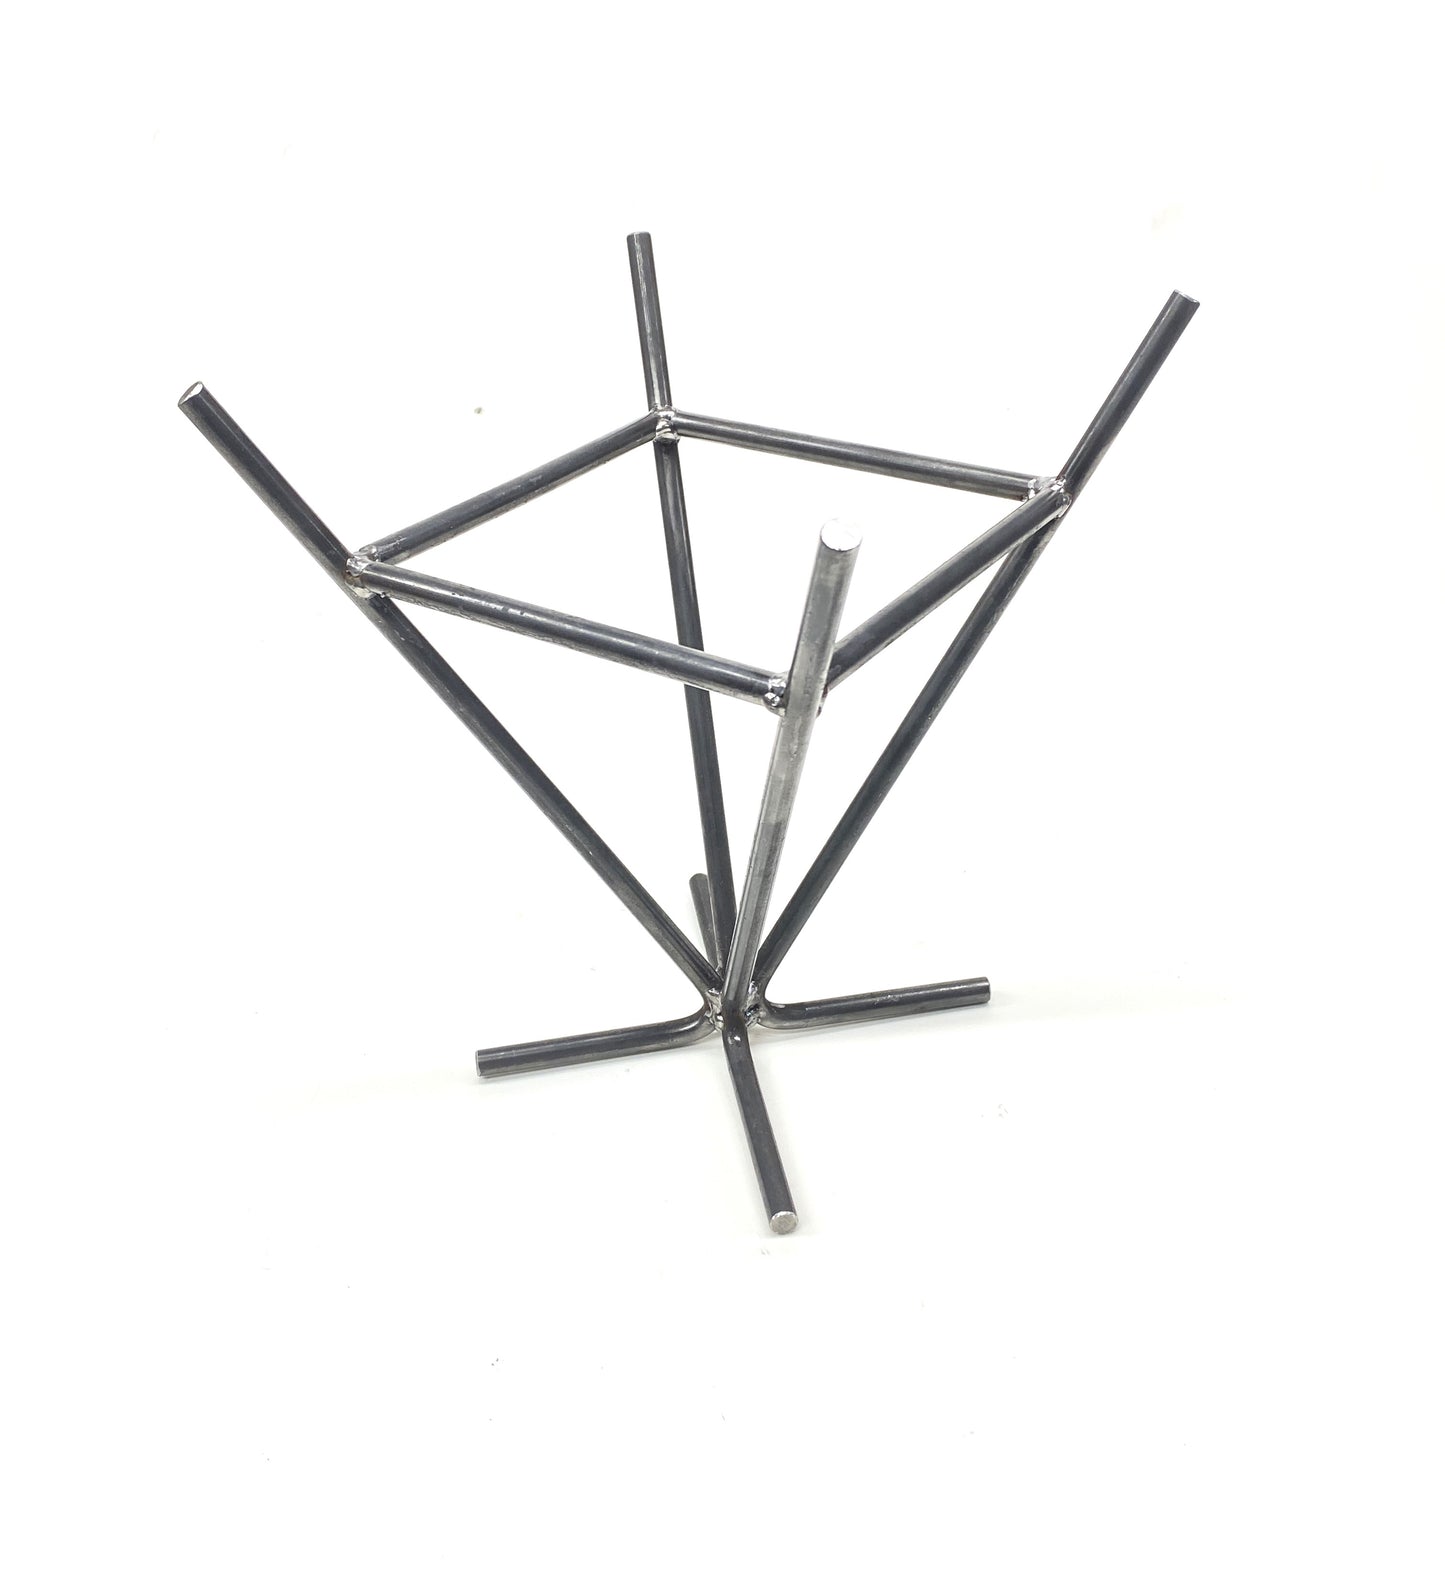 Vertical Fire Pit Grate WP Campfire Teepee, Patio, Kiva, Chiminea, BBQ Outdoor Fire, Wood Stacker, Outdoor Cooking Stand